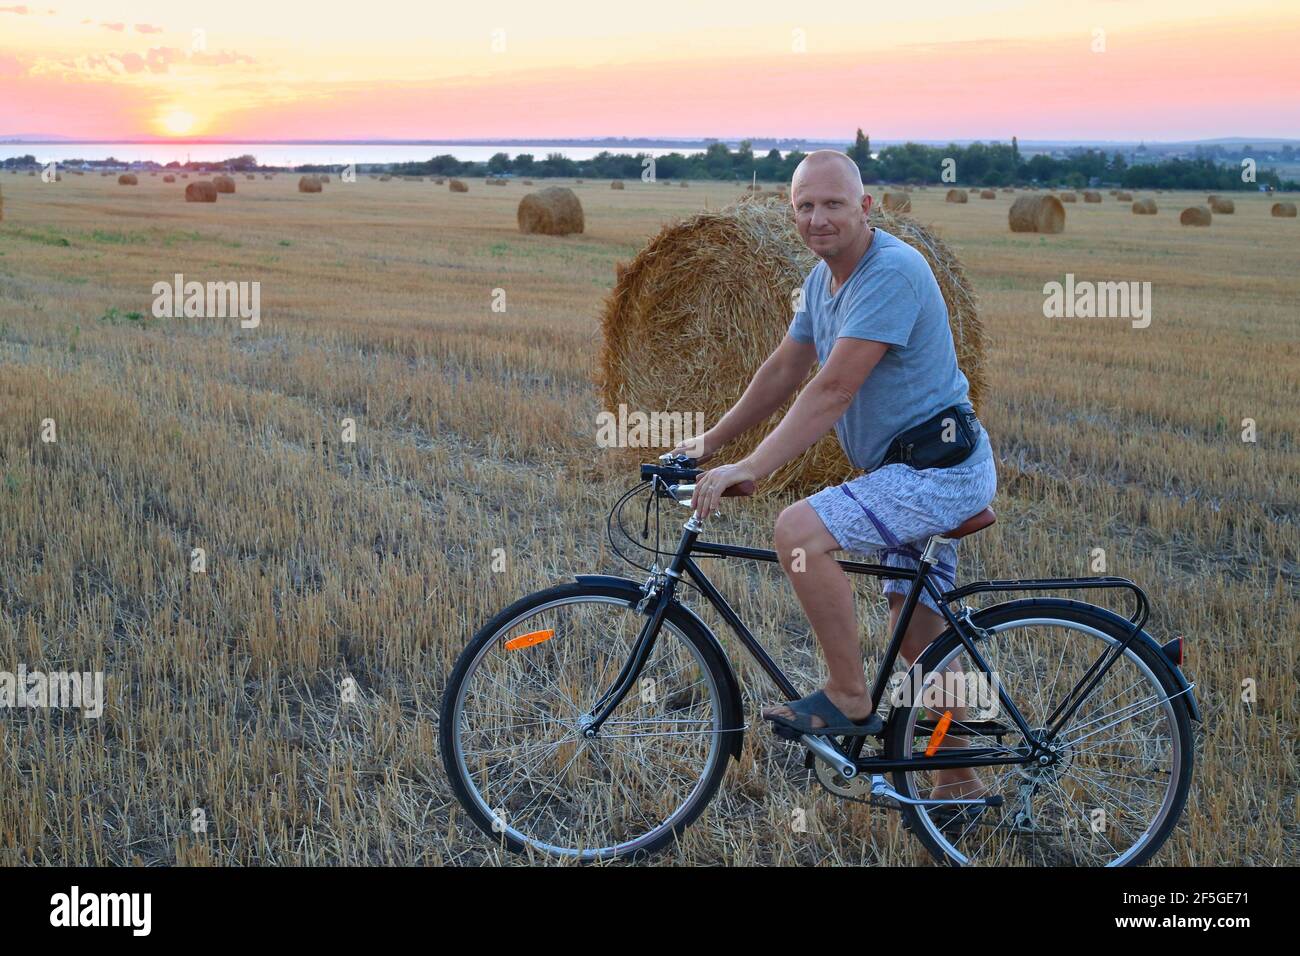 An adult man on a bicycle on a mowed field next to a straw walker at sunset. Sports and holiday activities in the countryside. Stock Photo